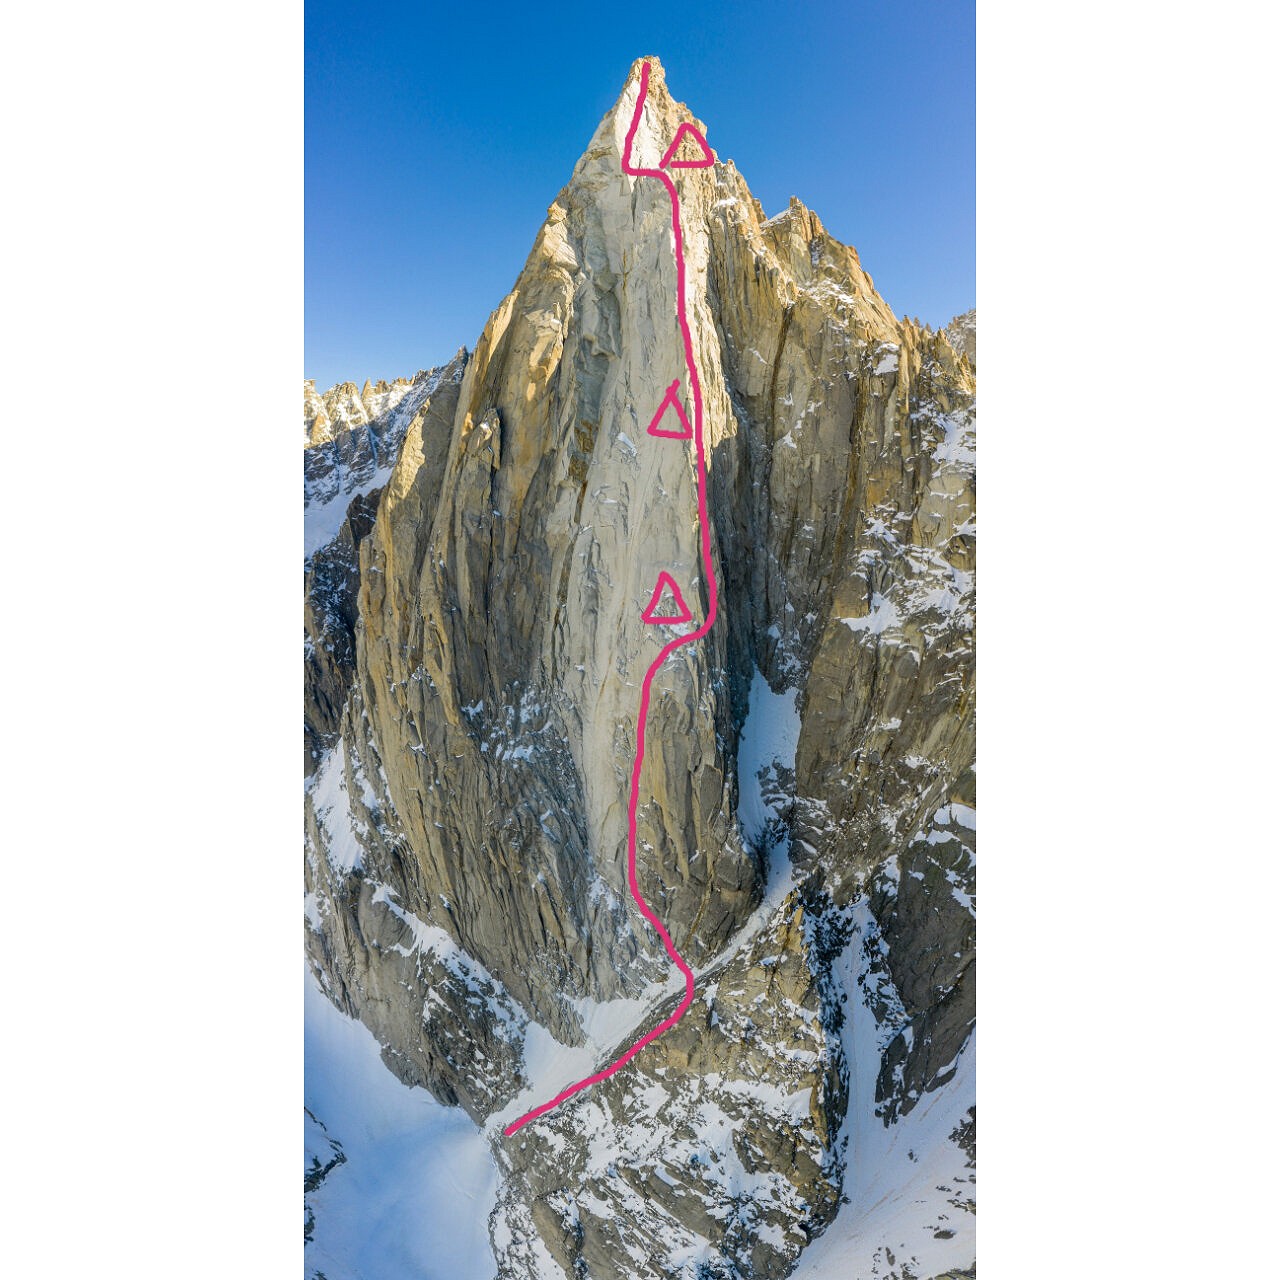 Line climbed by Will Sim and Korra Pesce on the SW Face, incorporating the Voie des Papas and the former Bonatti Pillar area.  © Chris Bonington